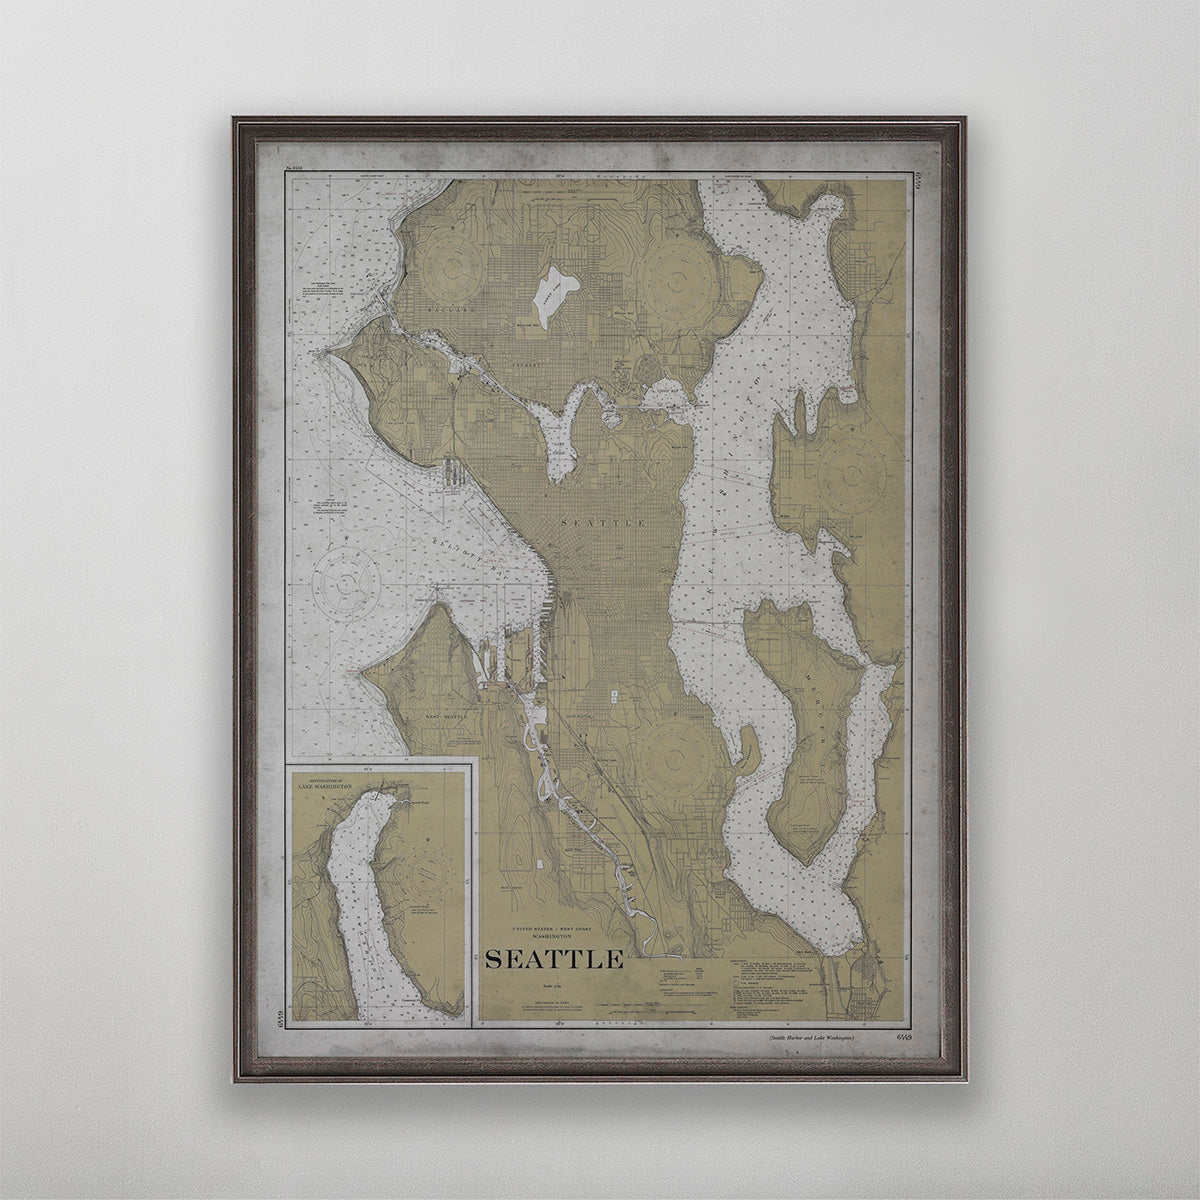 Old vintage historic nautical chart of Seattle wall art home decor. 